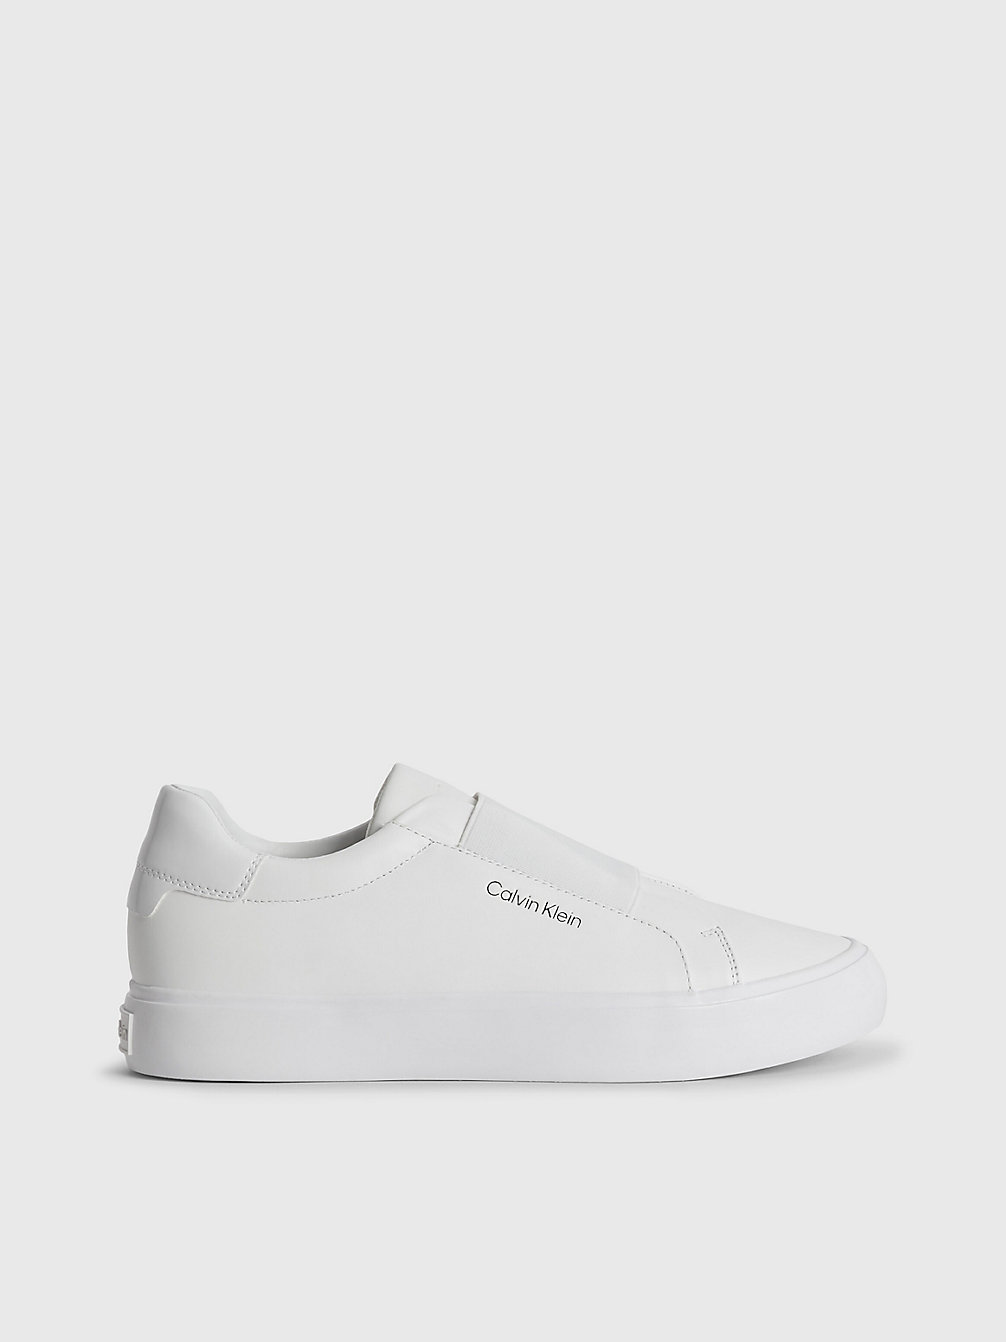 Shoes for Women | Sneakers, Boots & More | Calvin Klein®